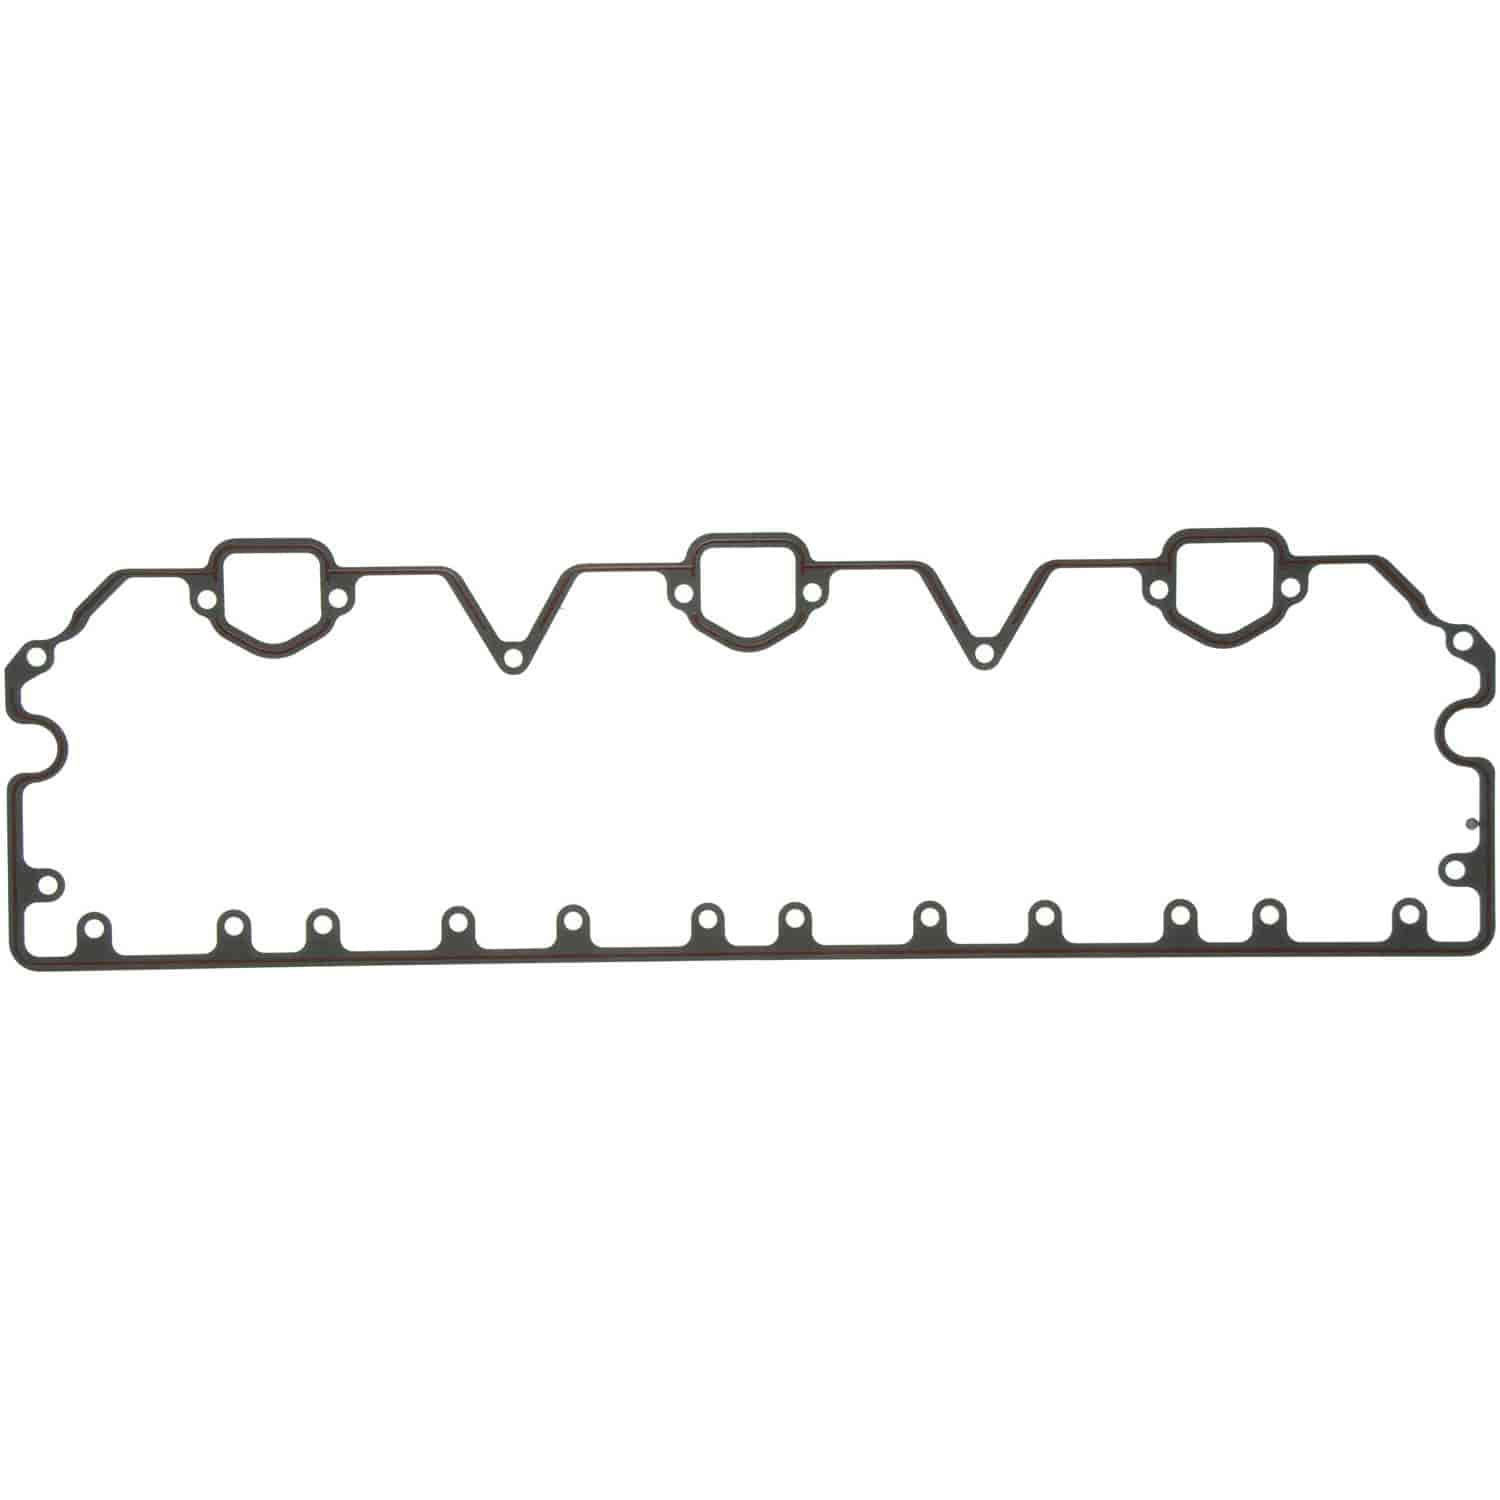 Rocker Cover Gasket for Cummins Late Model L10 and M11 Engines